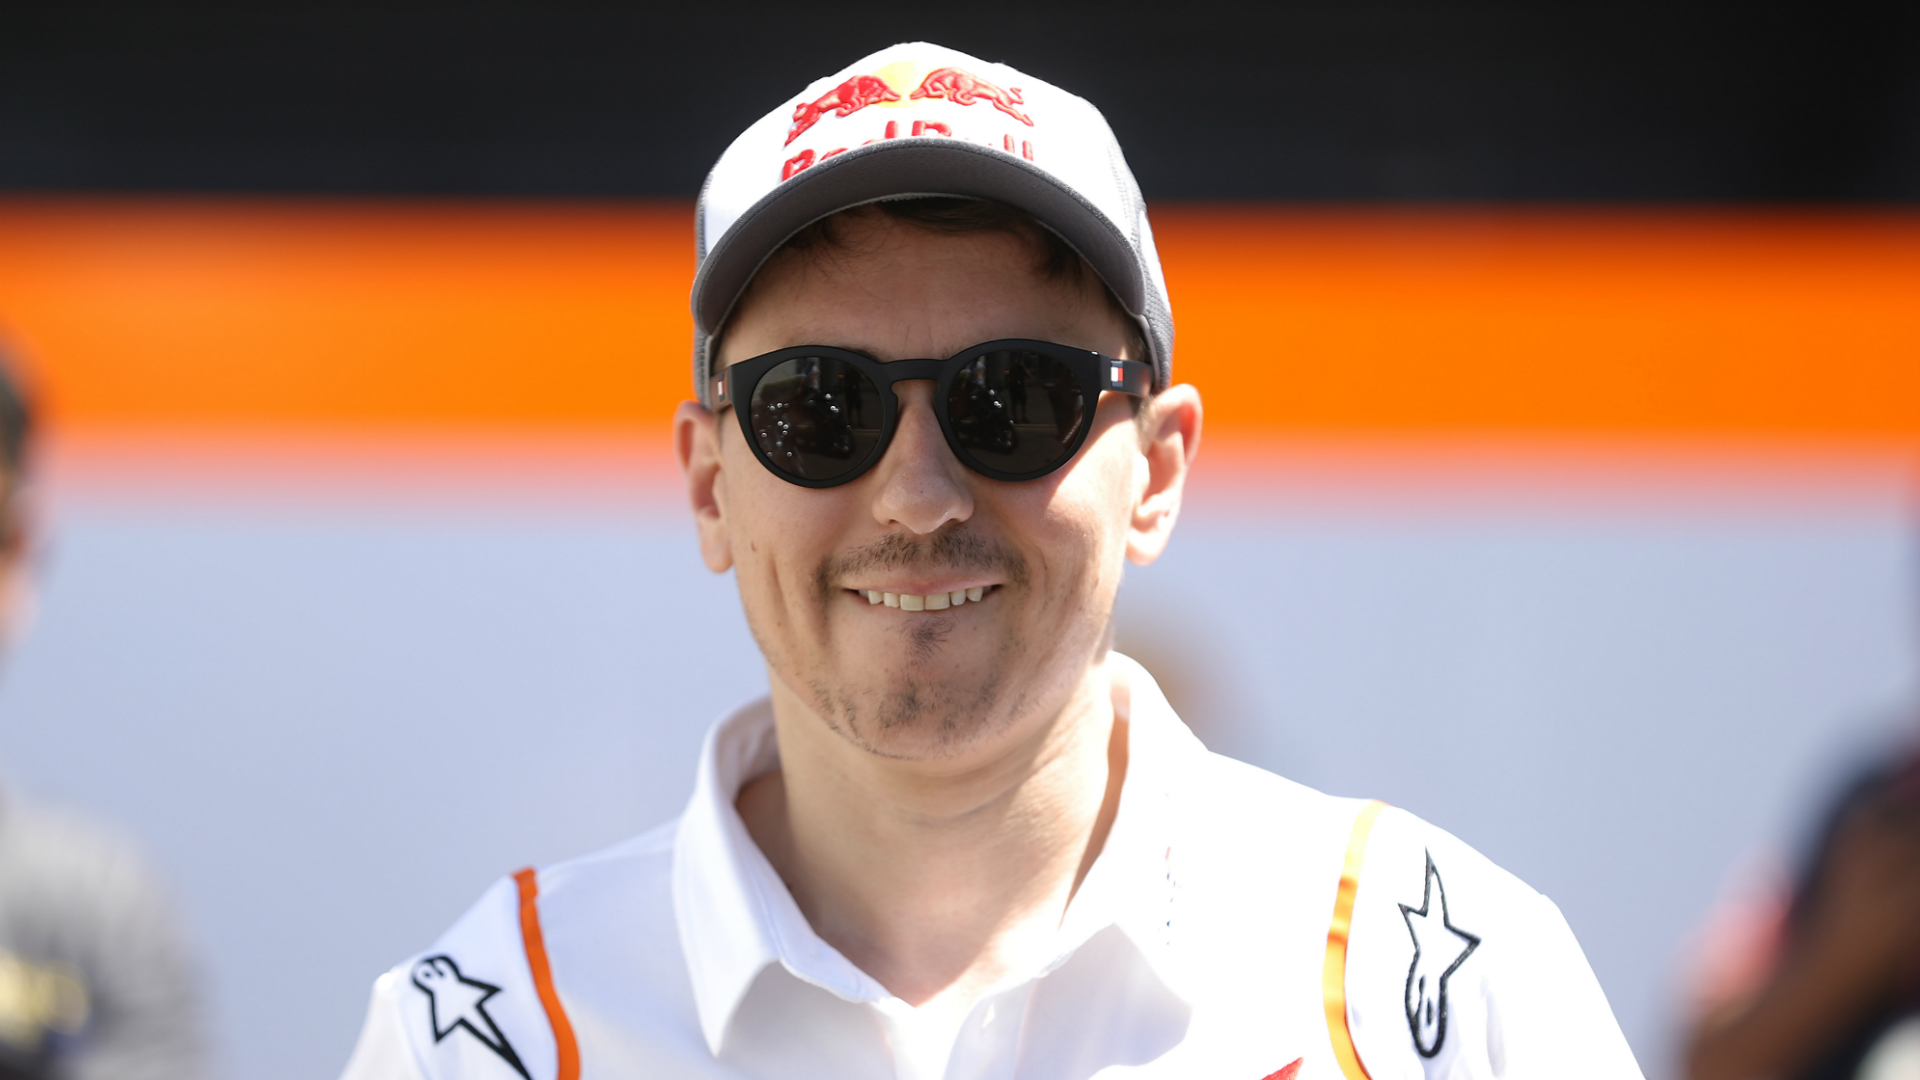 Lorenzo Plans To Party Before Deciding What's Next